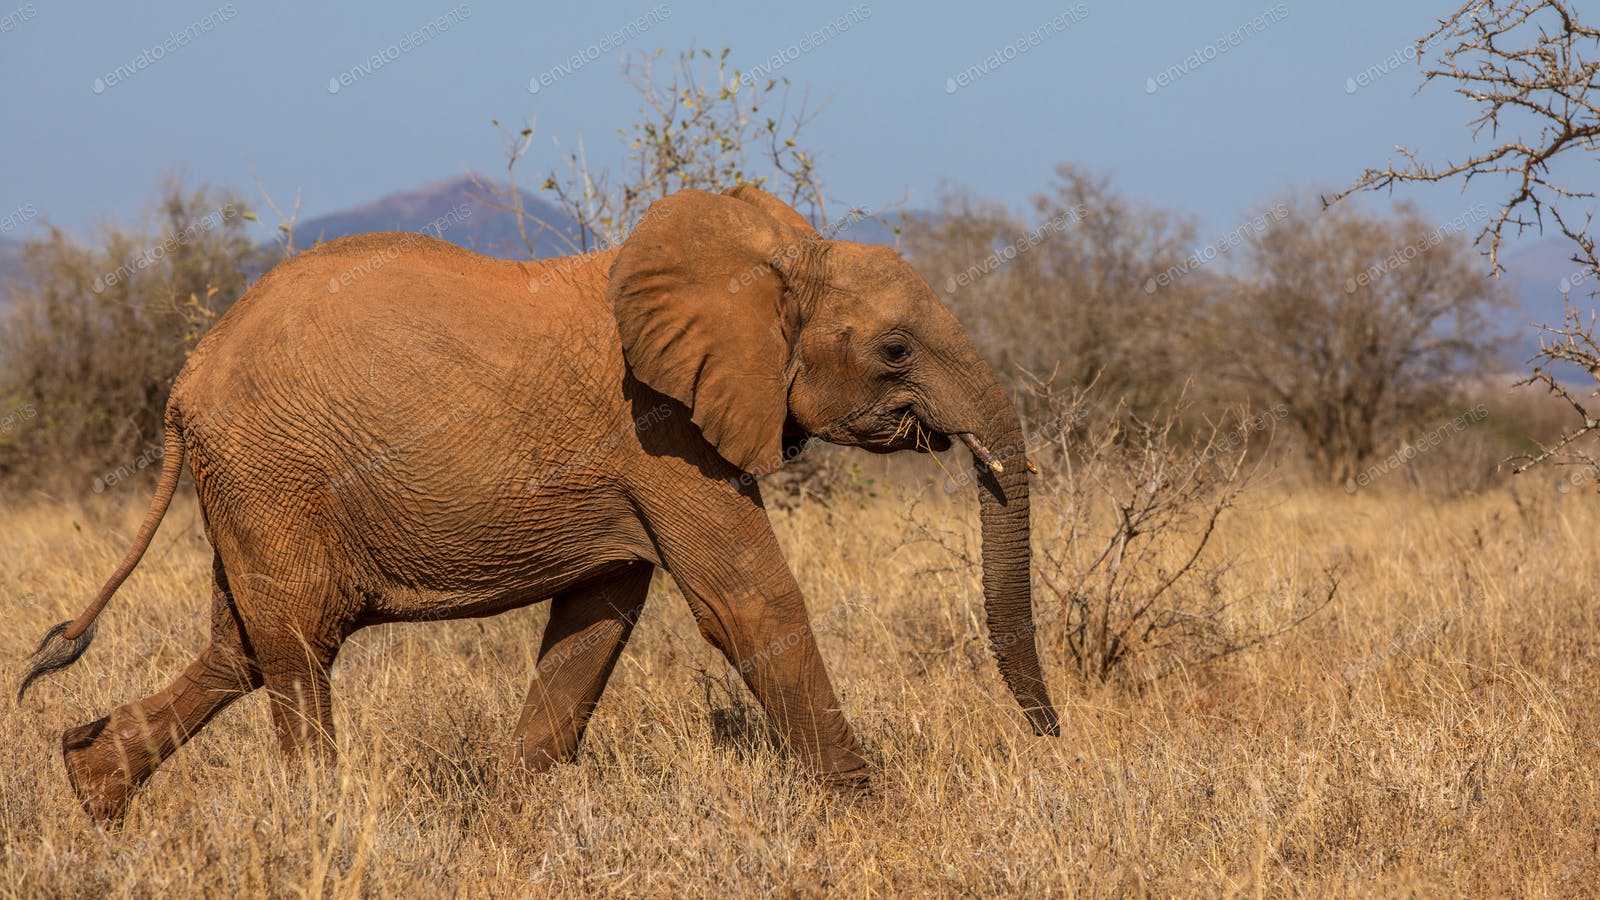 Beautiful Image of of African Elephants in Africa photo by MHSKYPIXEL on Envato Elements